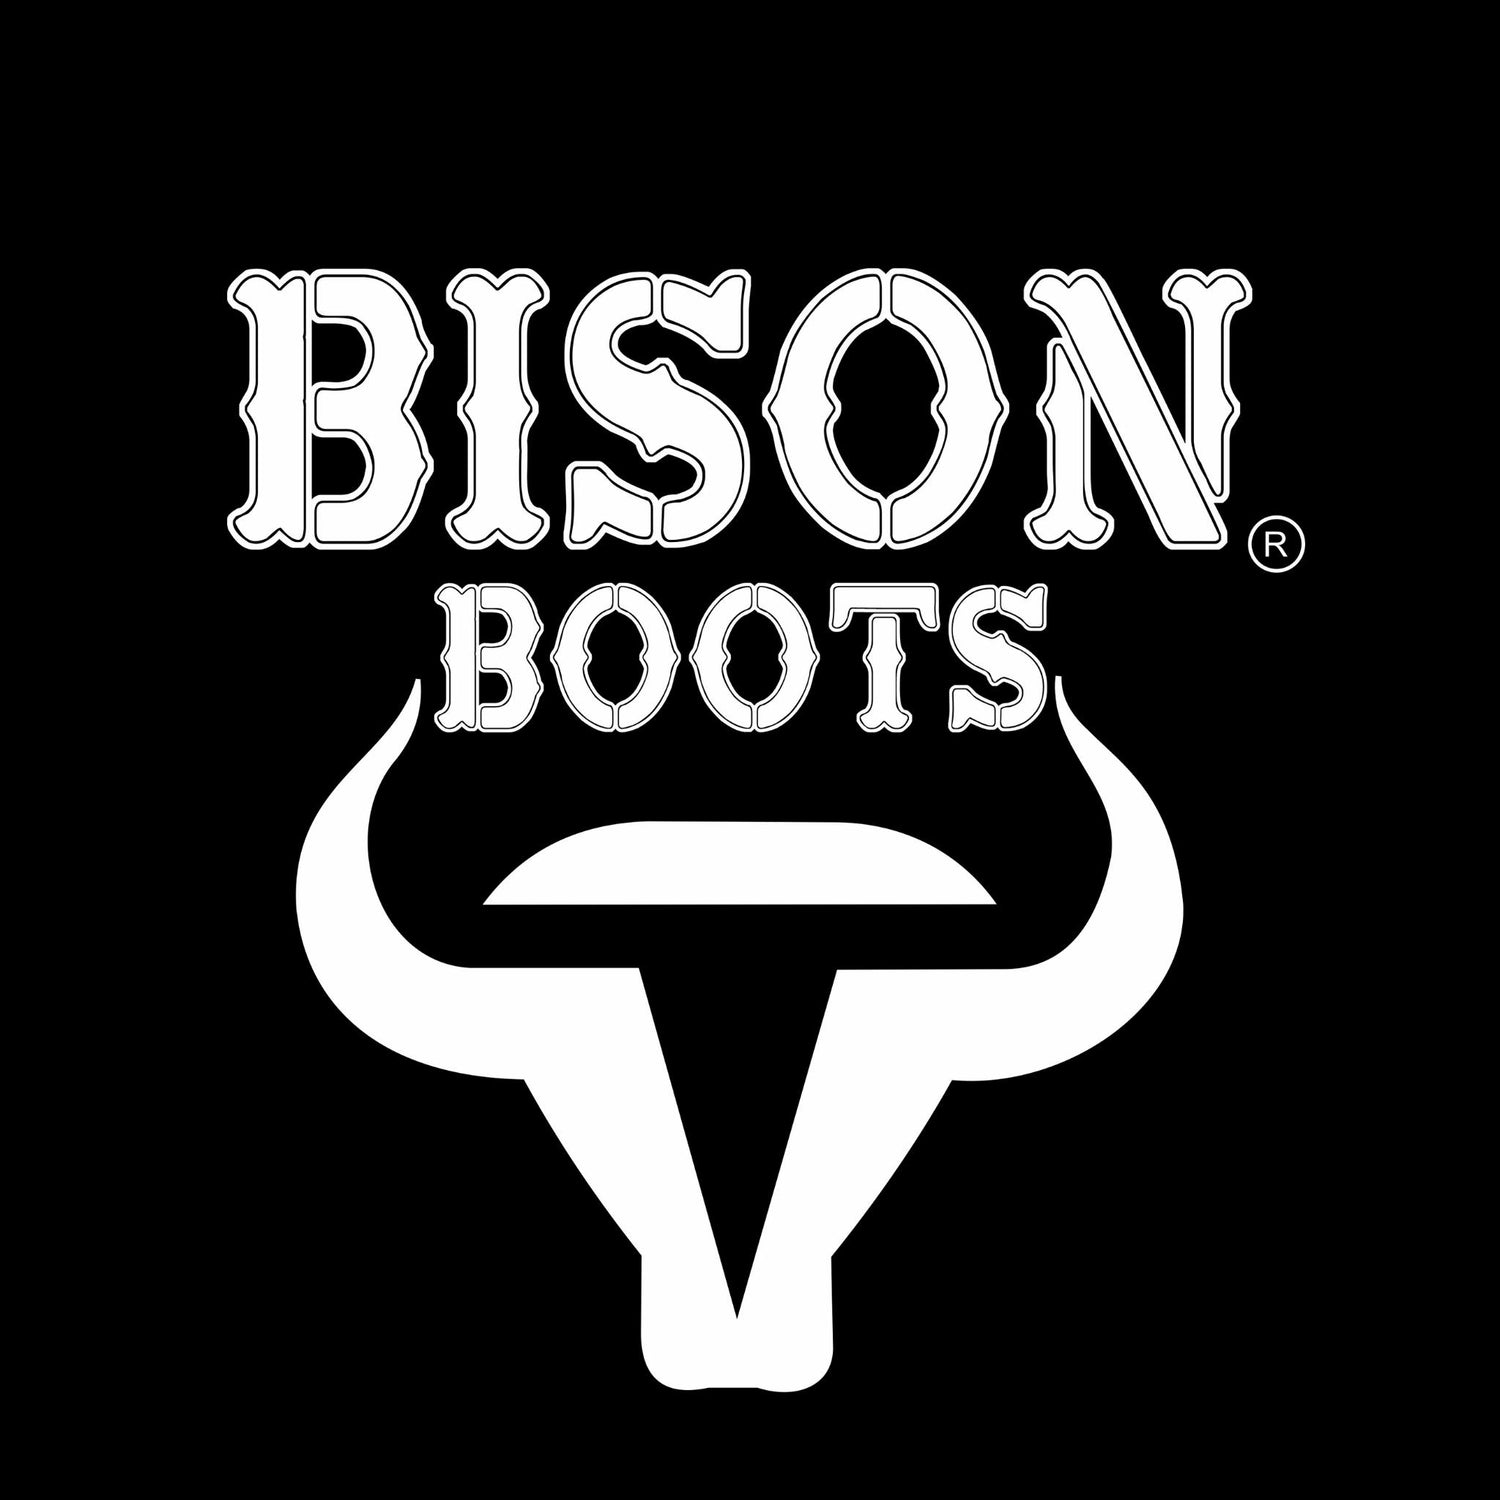 Bison Boots, since 1999